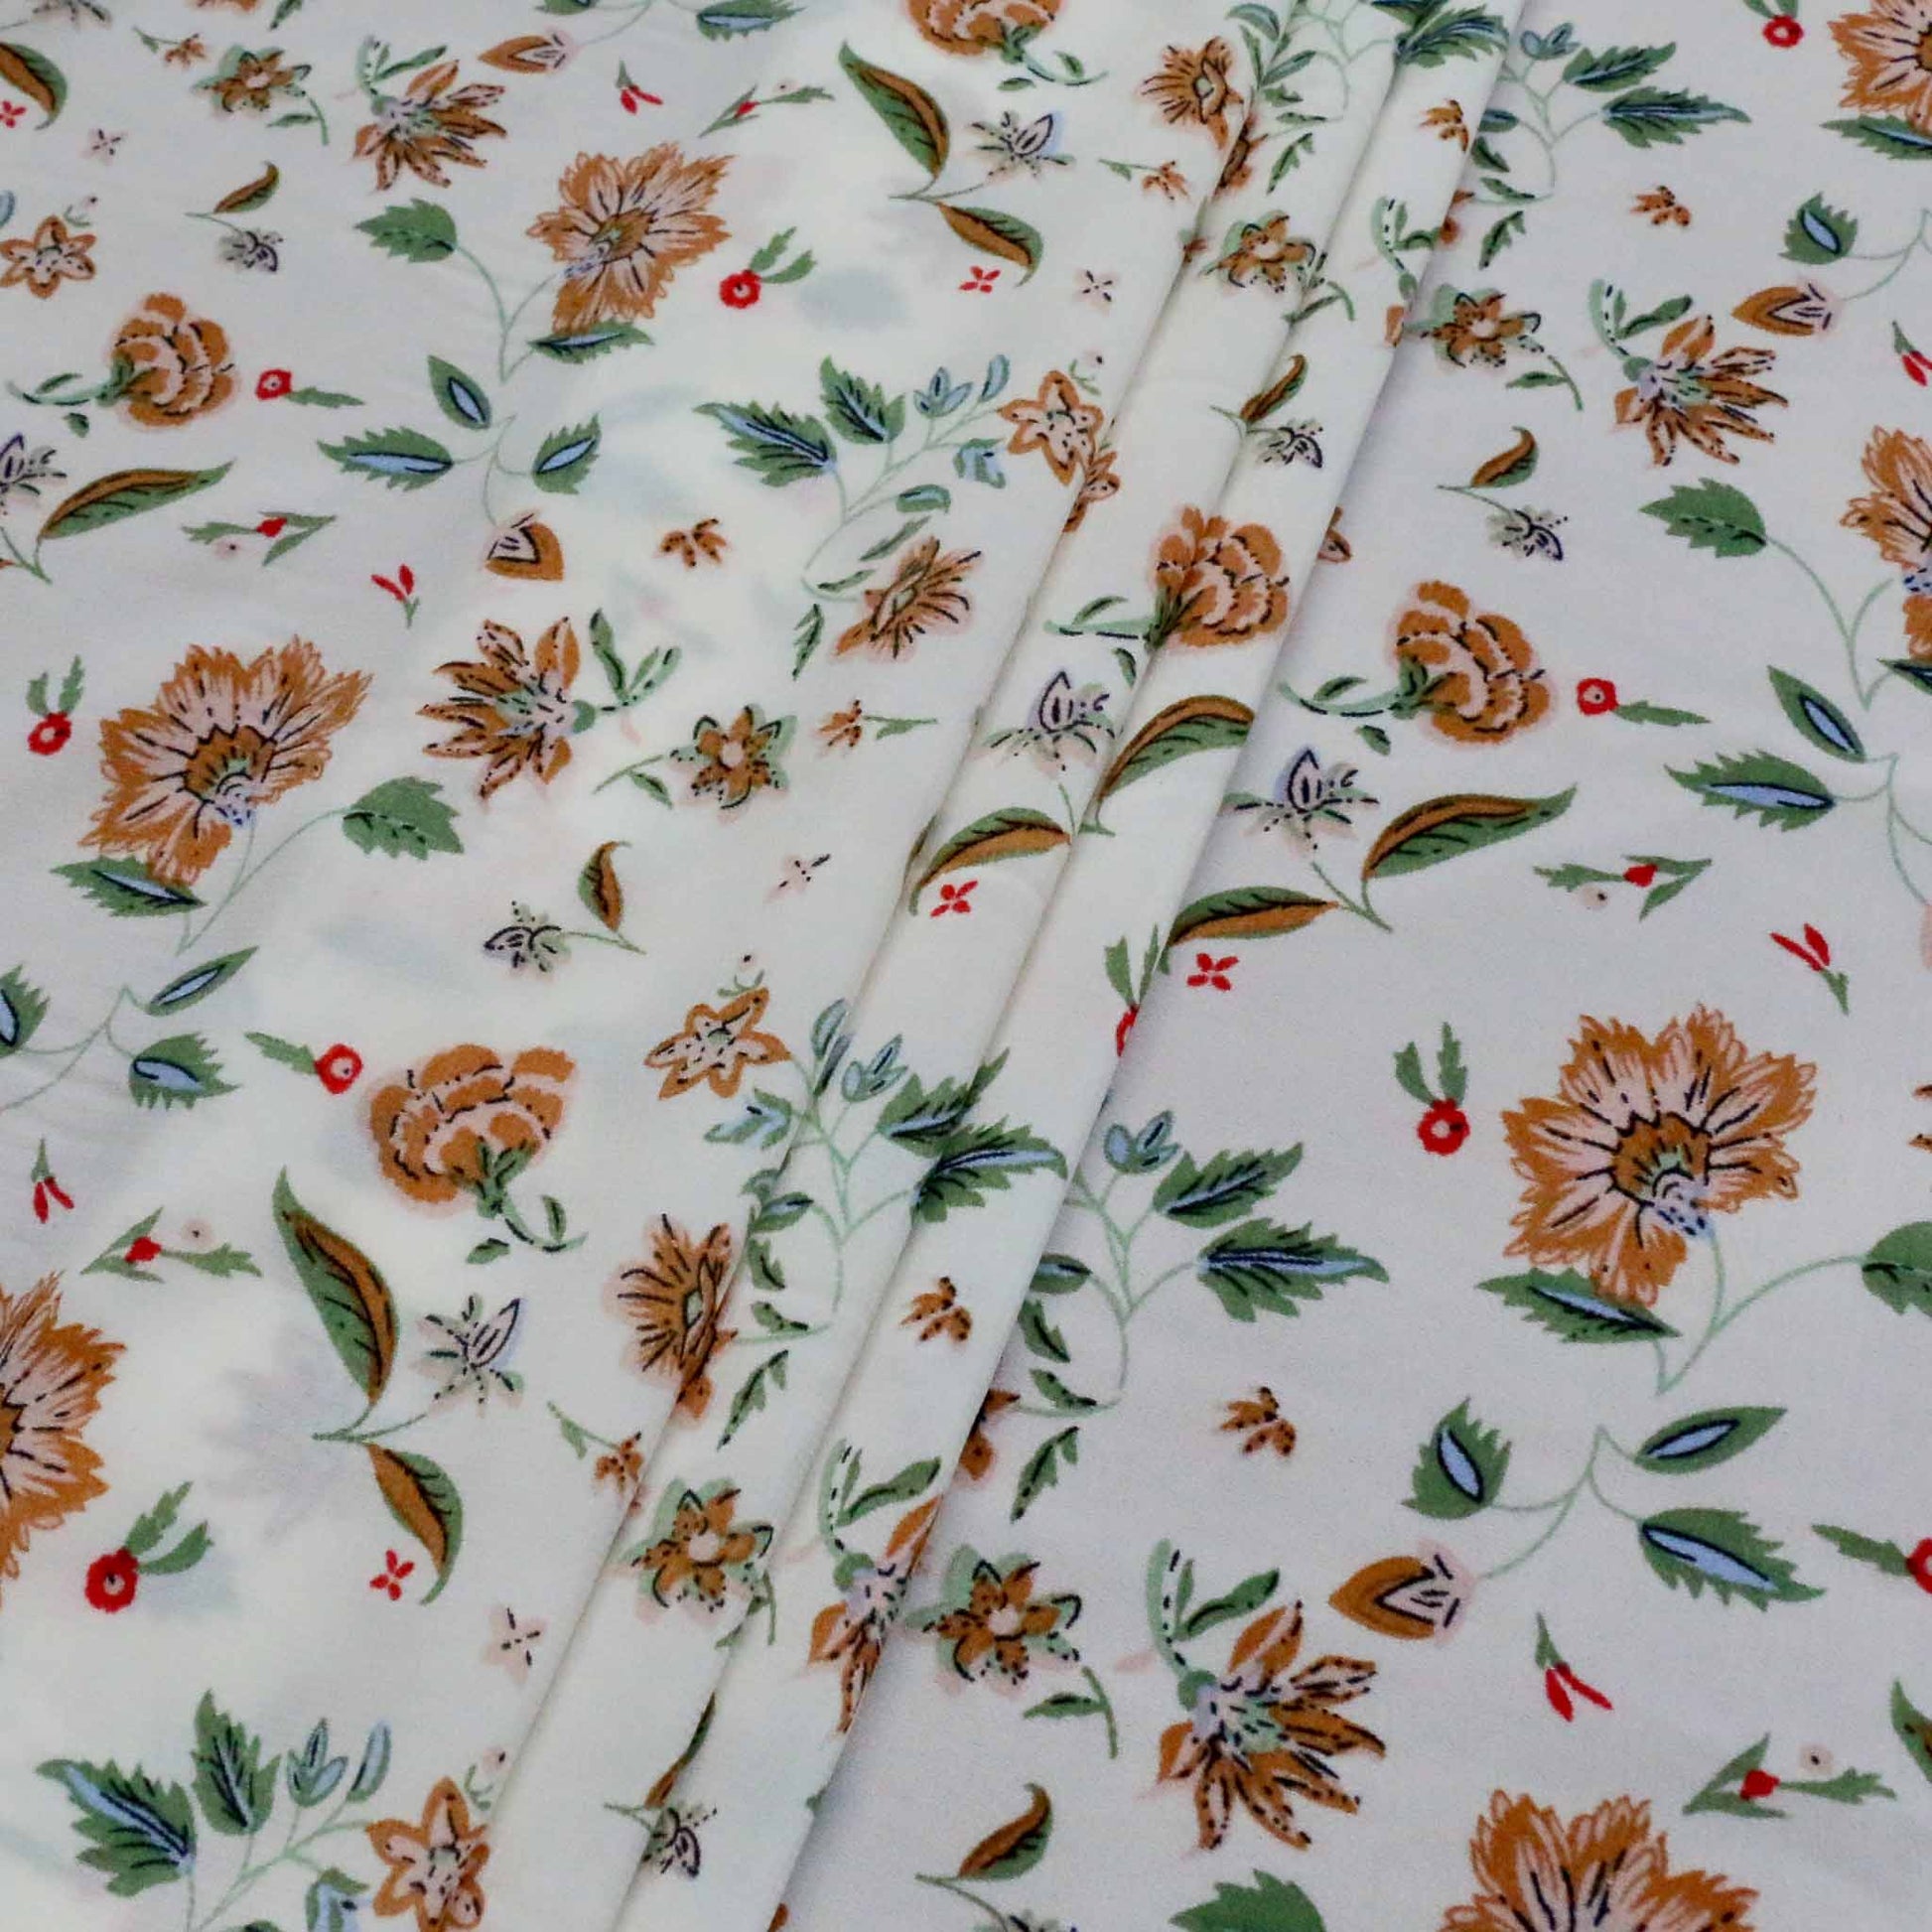 brown and green floral print on white chiffon stretchy dressmaking fabric